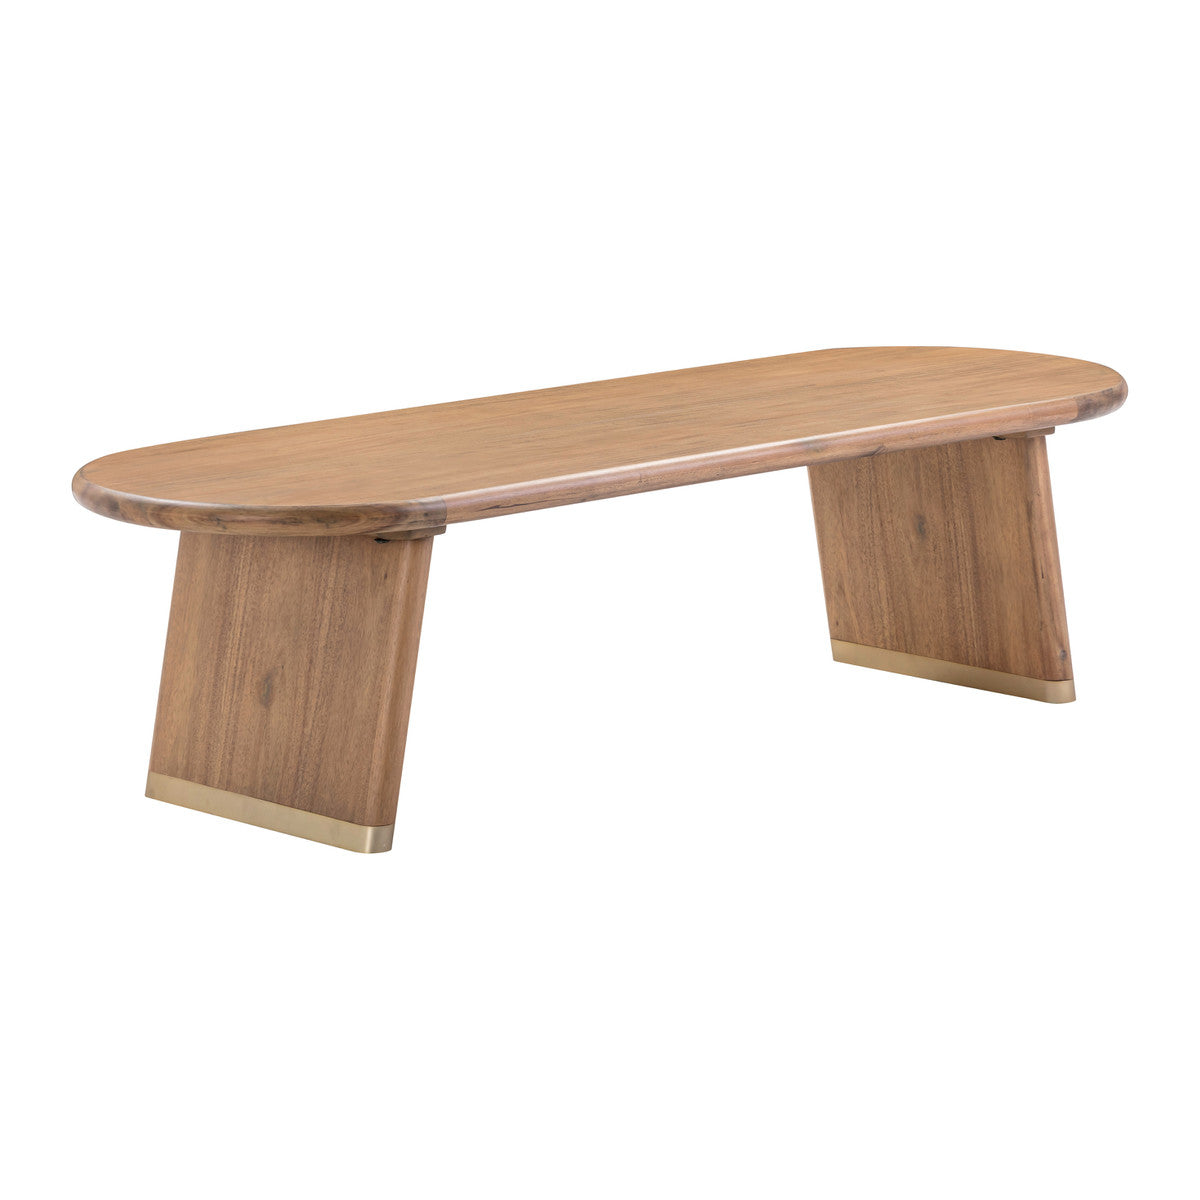 Kato Cognac Acacia Bench with Boucle Seat - Luxury Living Collection